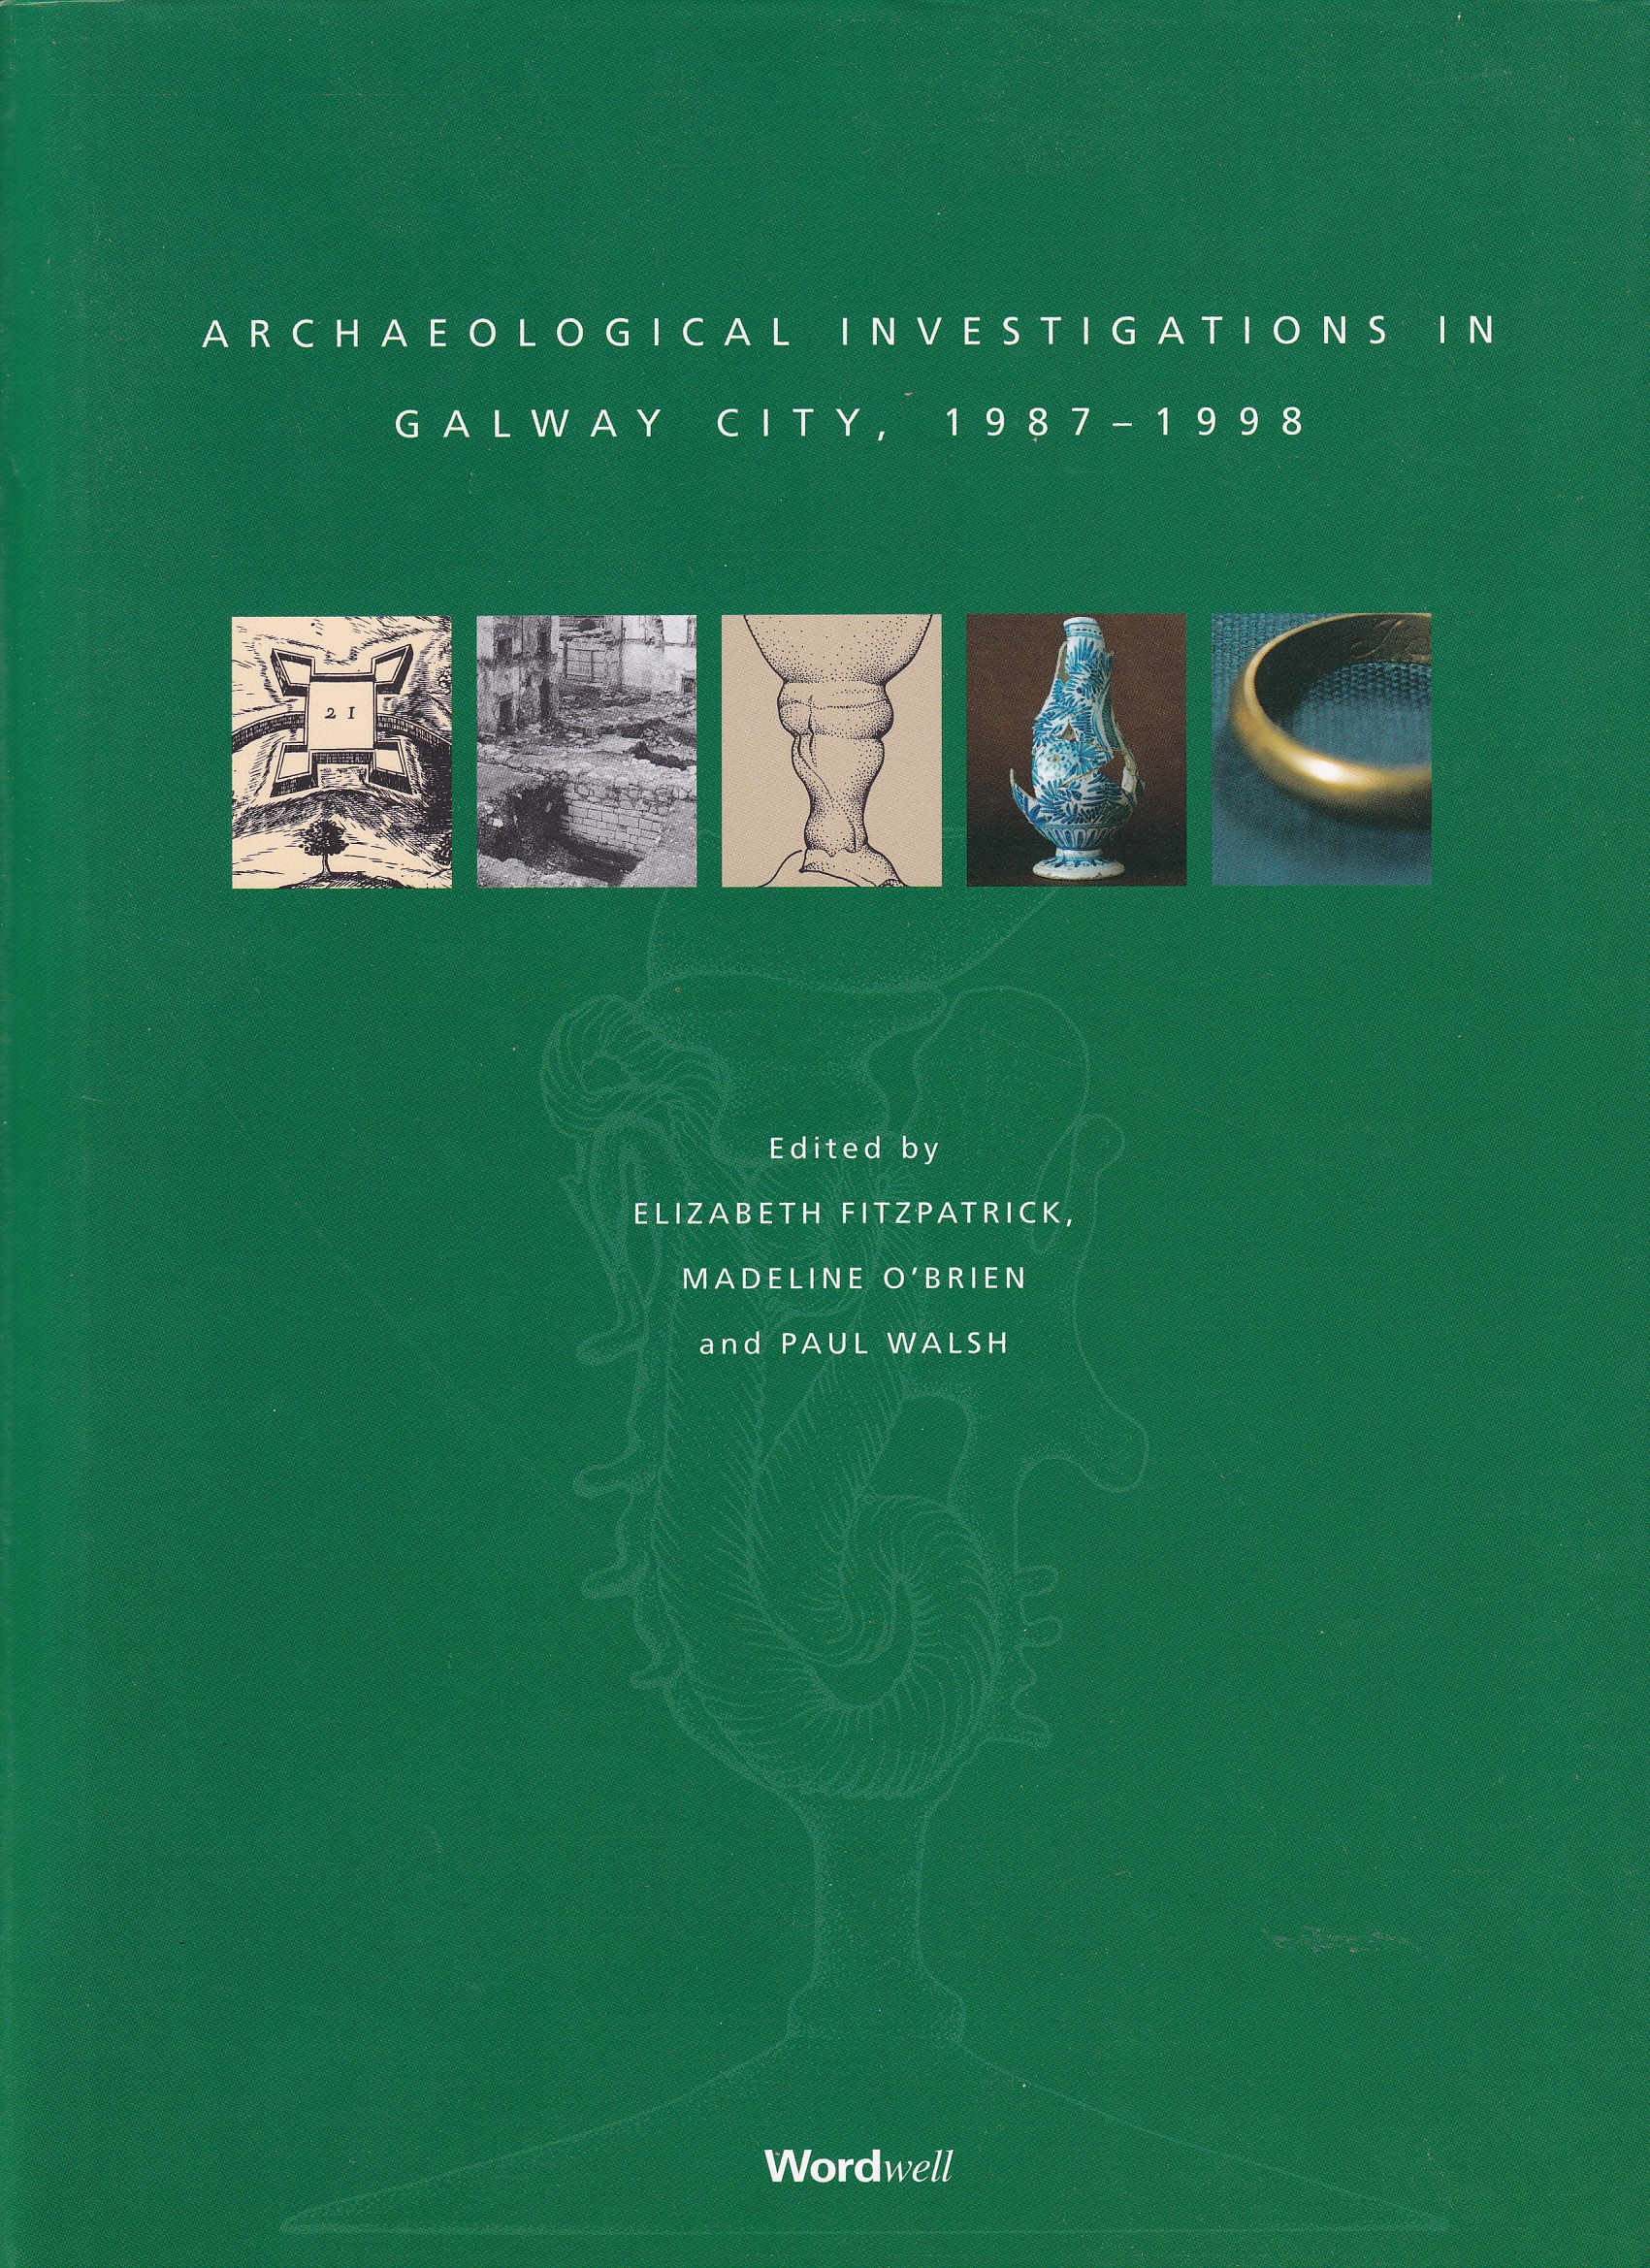 Archaeological Investigations in Galway City, 1987-1998 (Limited Edition) | Elizabeth Fitzpatrick, Madeline O Brien, Paul Walsh eds | Charlie Byrne's